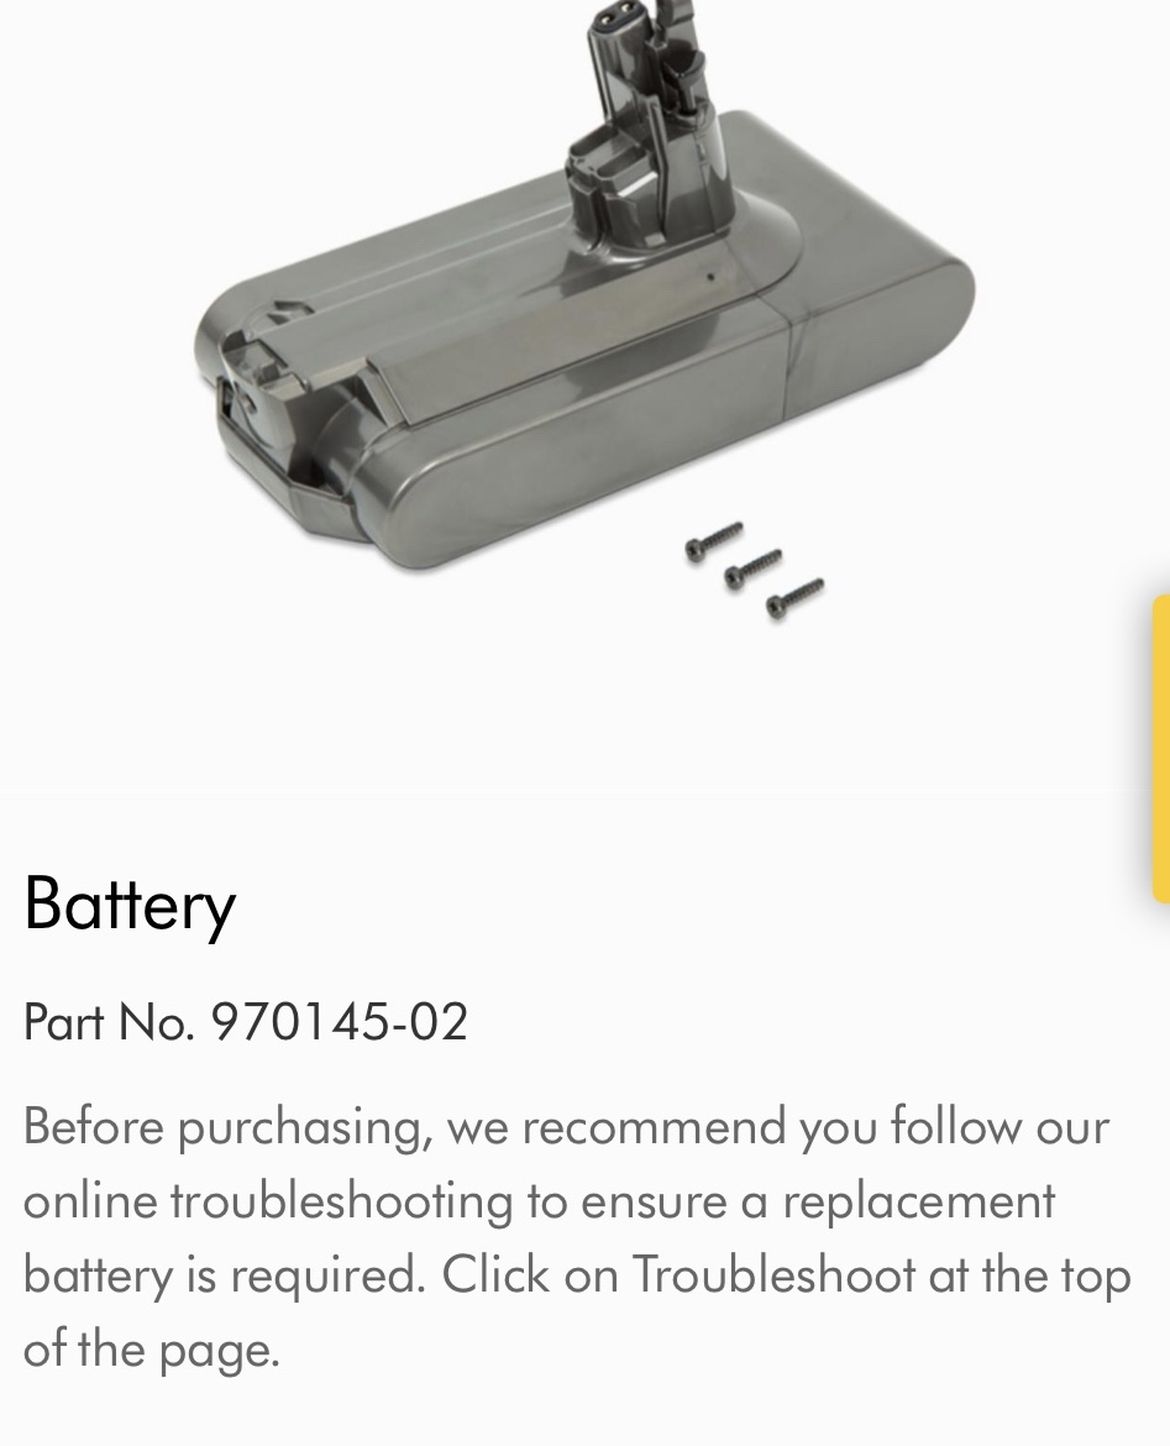 Replacement battery for your Dyson V11™ vacuum